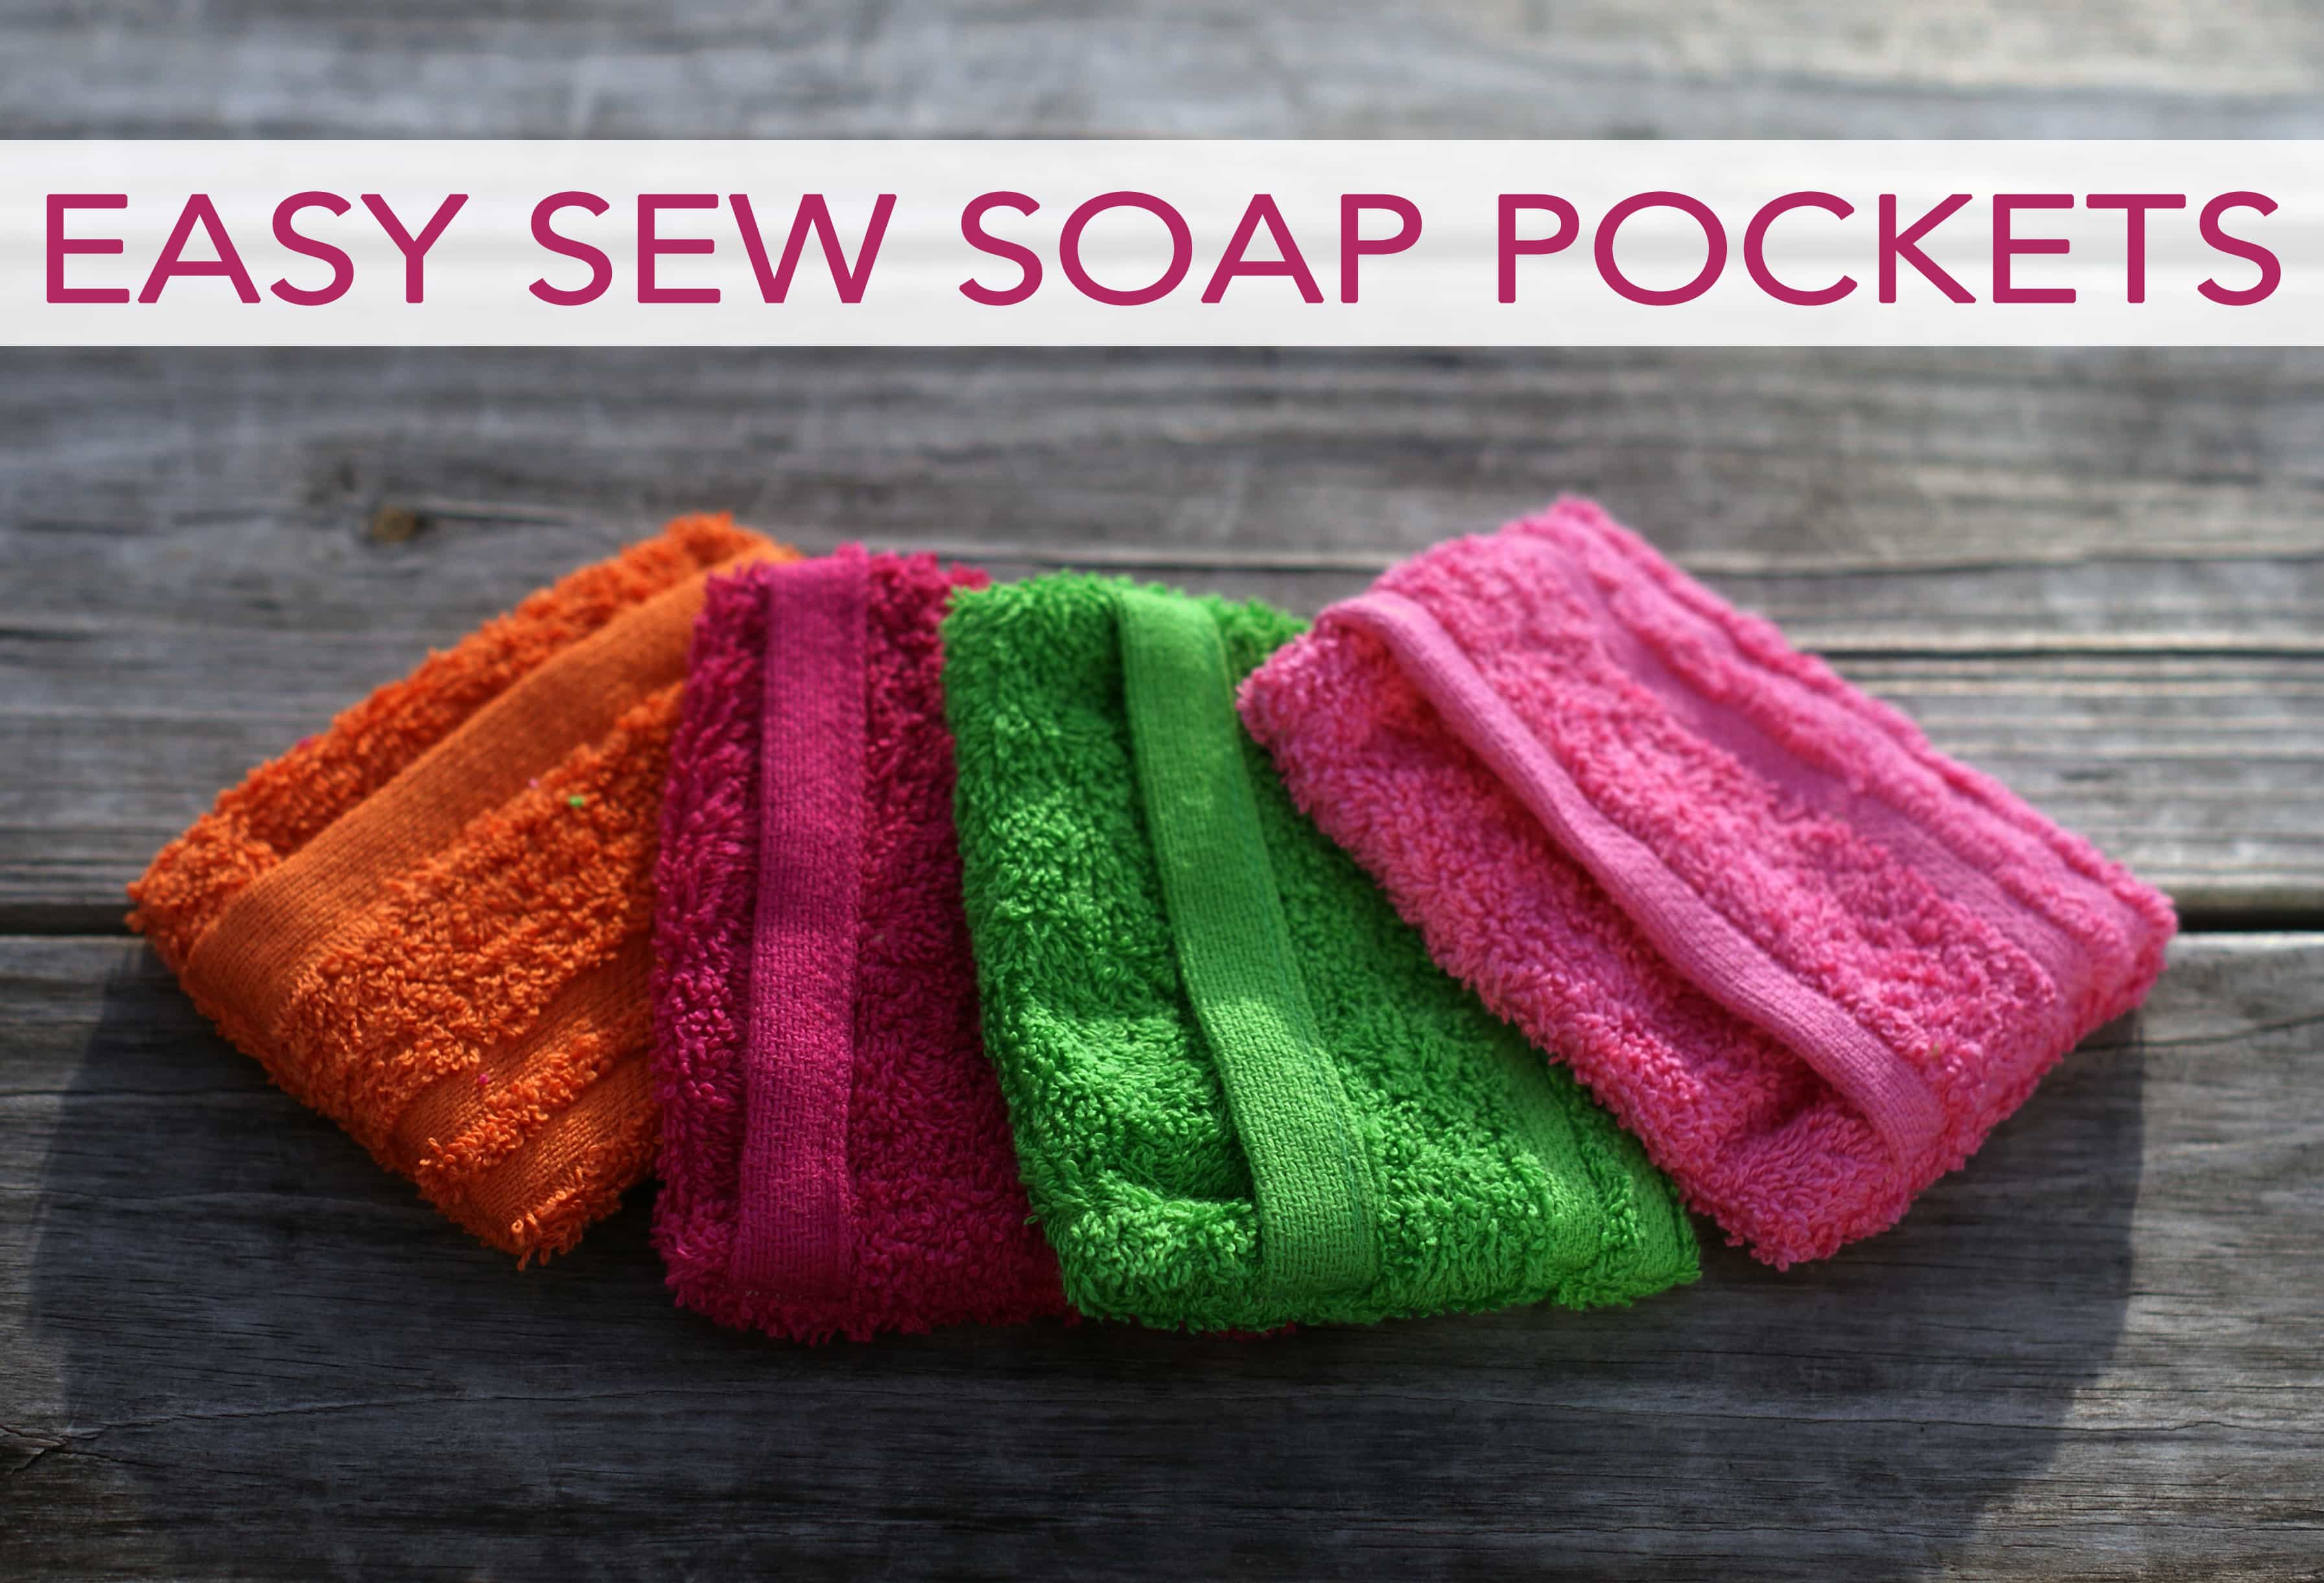 You are currently viewing 101 Days of Christmas: Easy Sew Soap Pockets